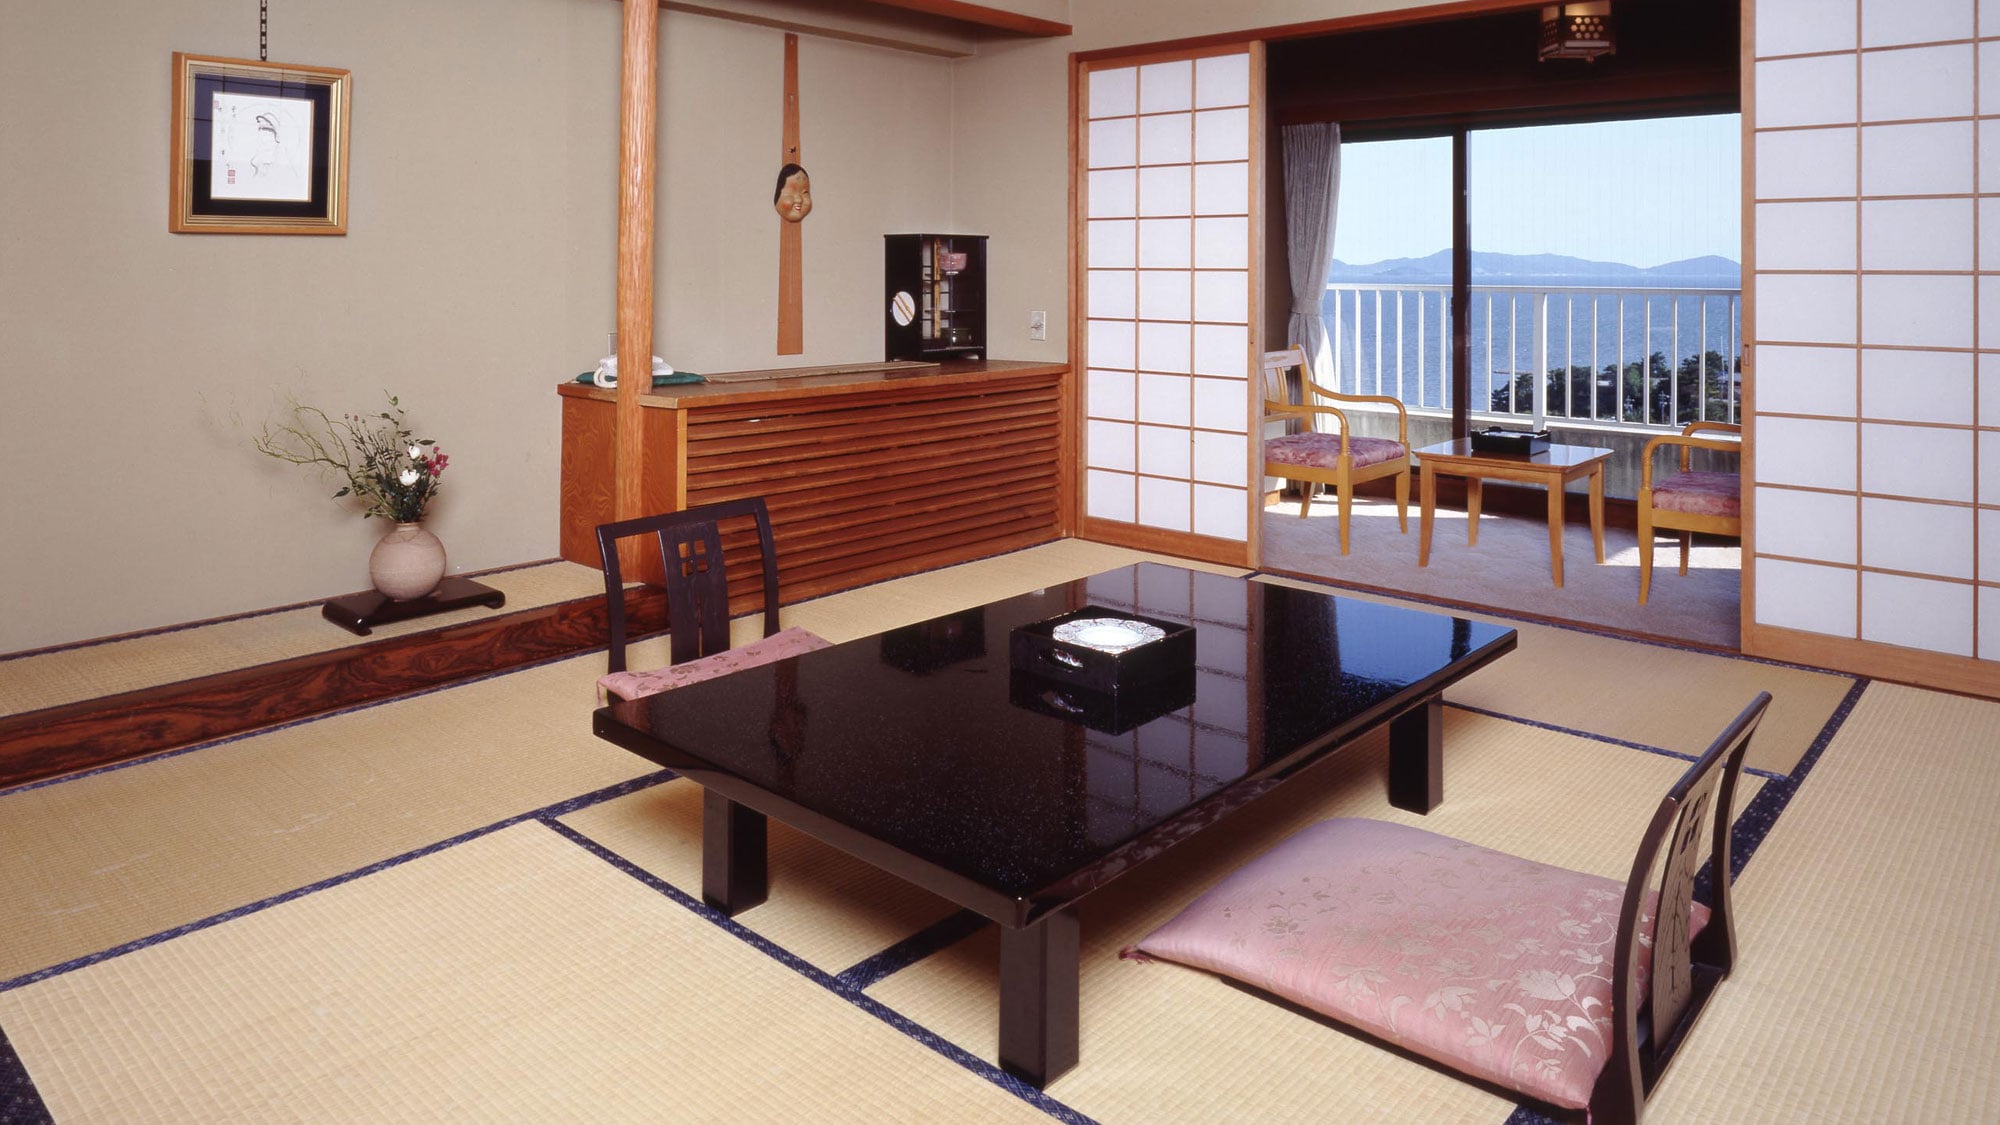 West Building Sea side guest room (Japanese-style room with 10 tatami mat bath and toilet)